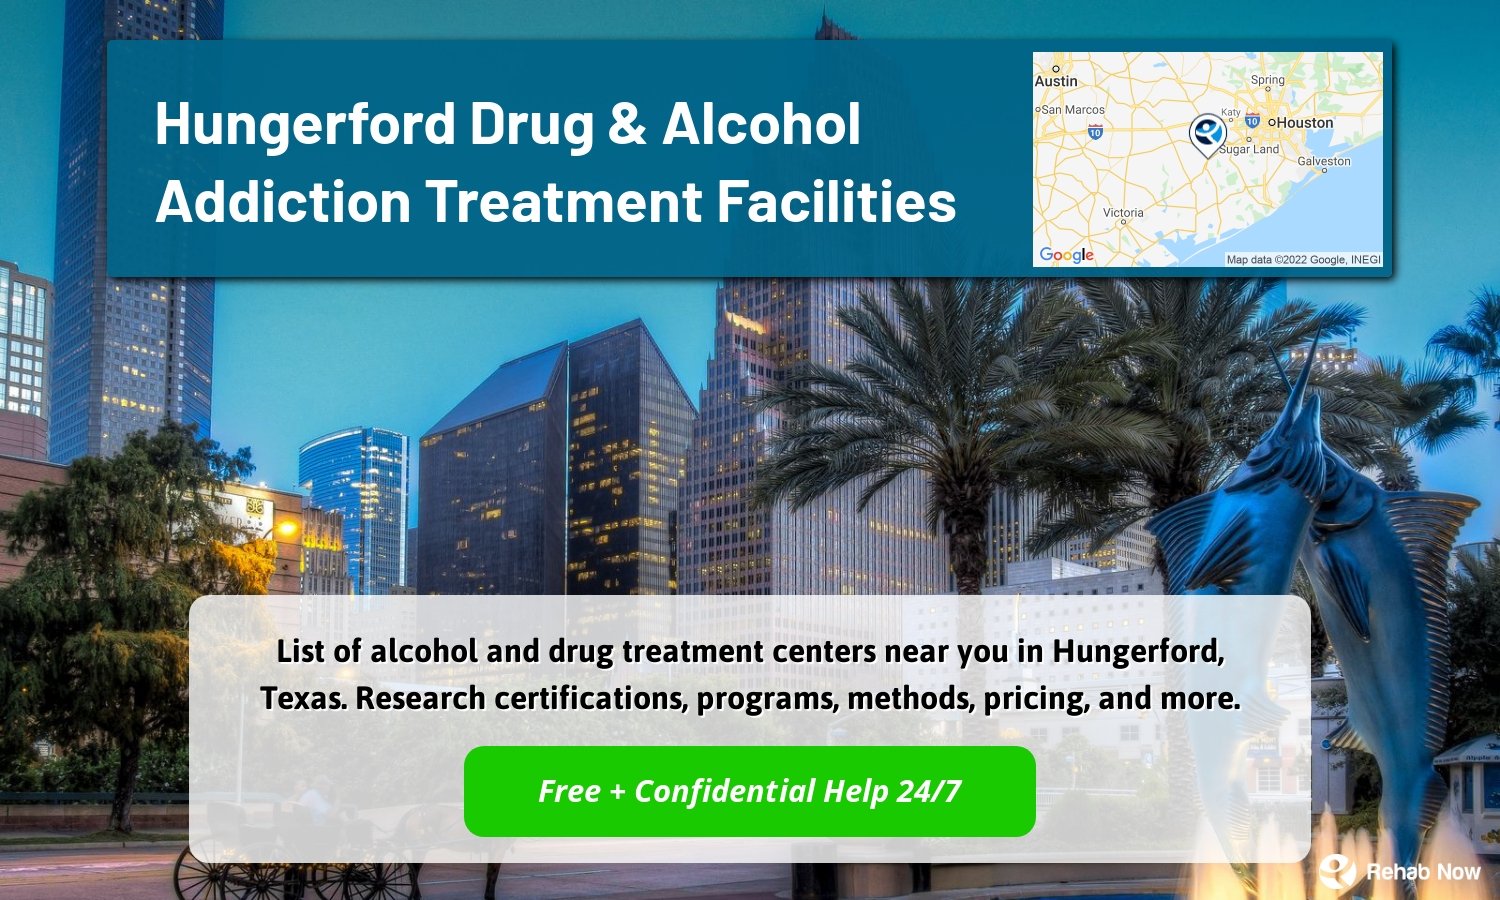 List of alcohol and drug treatment centers near you in Hungerford, Texas. Research certifications, programs, methods, pricing, and more.